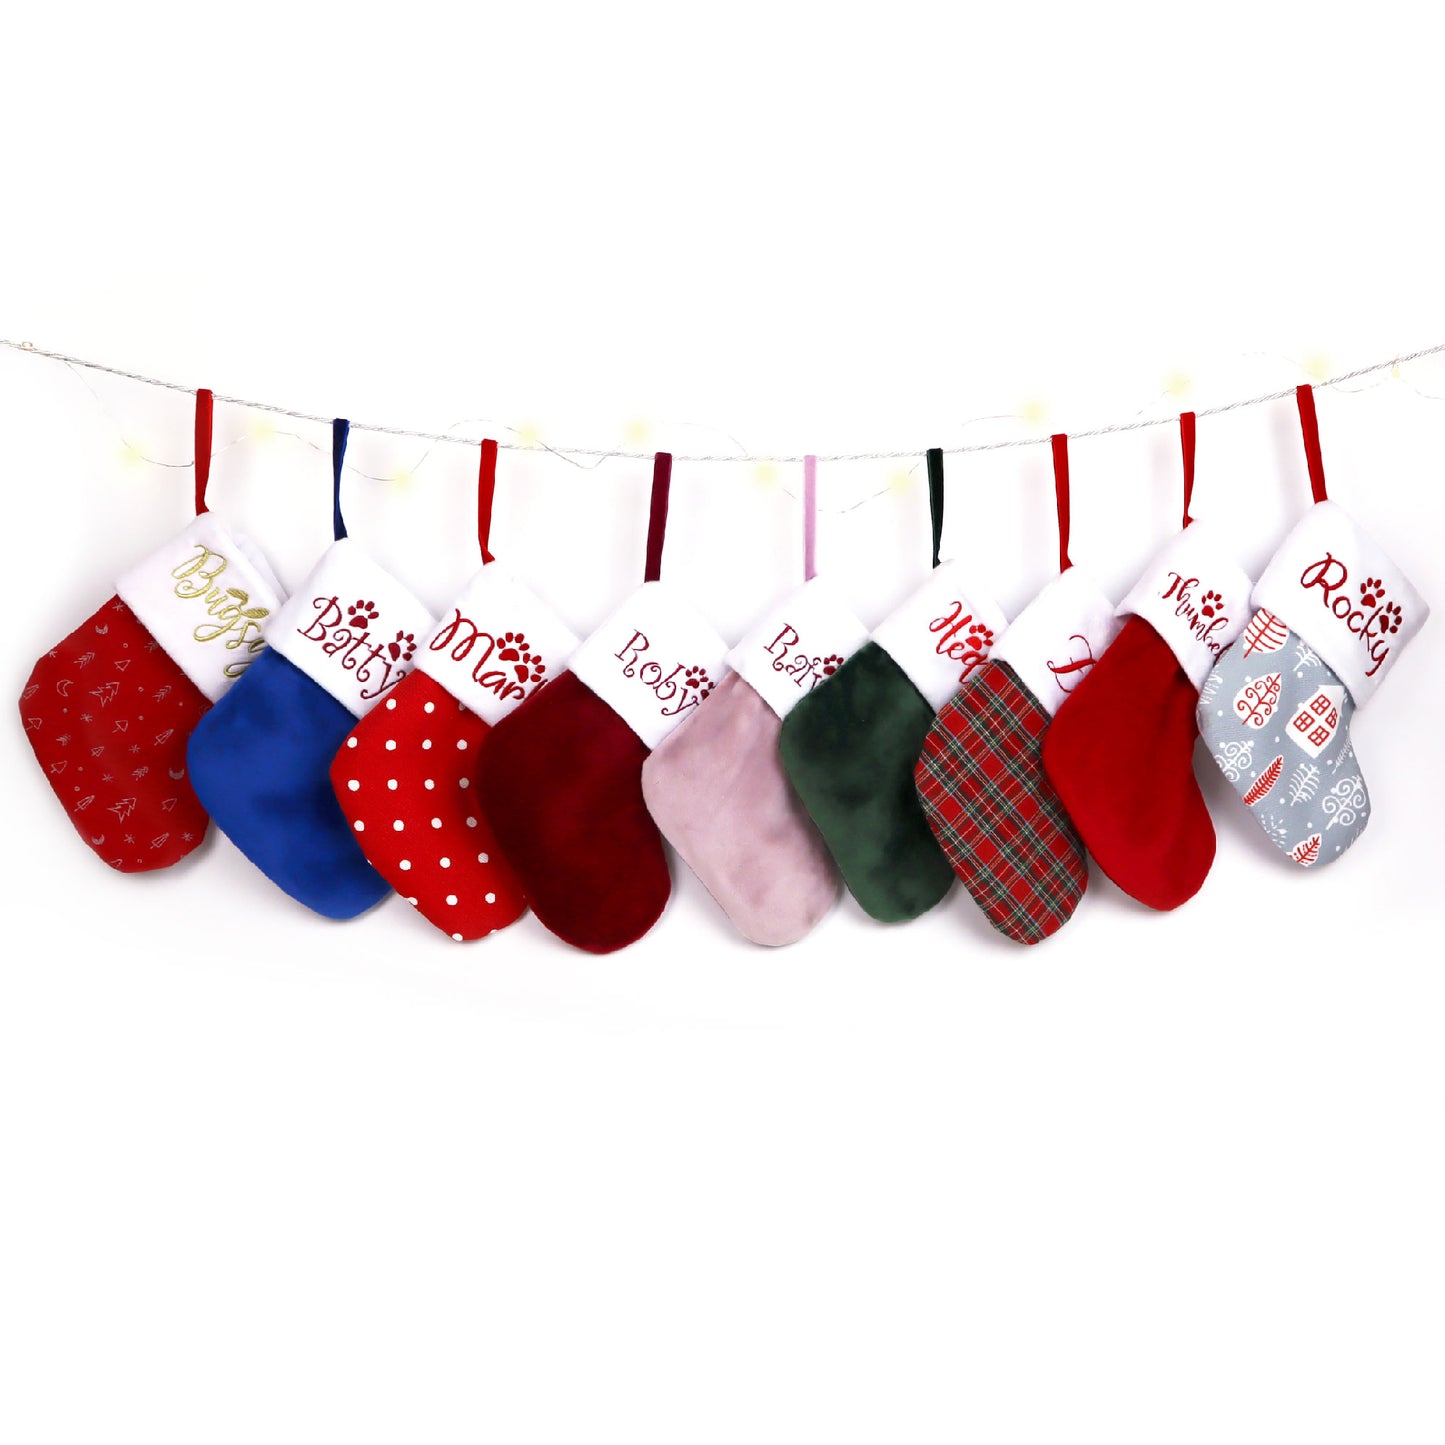 Dog Christmas stocking personalized embroidered for whole Family (royal blue)